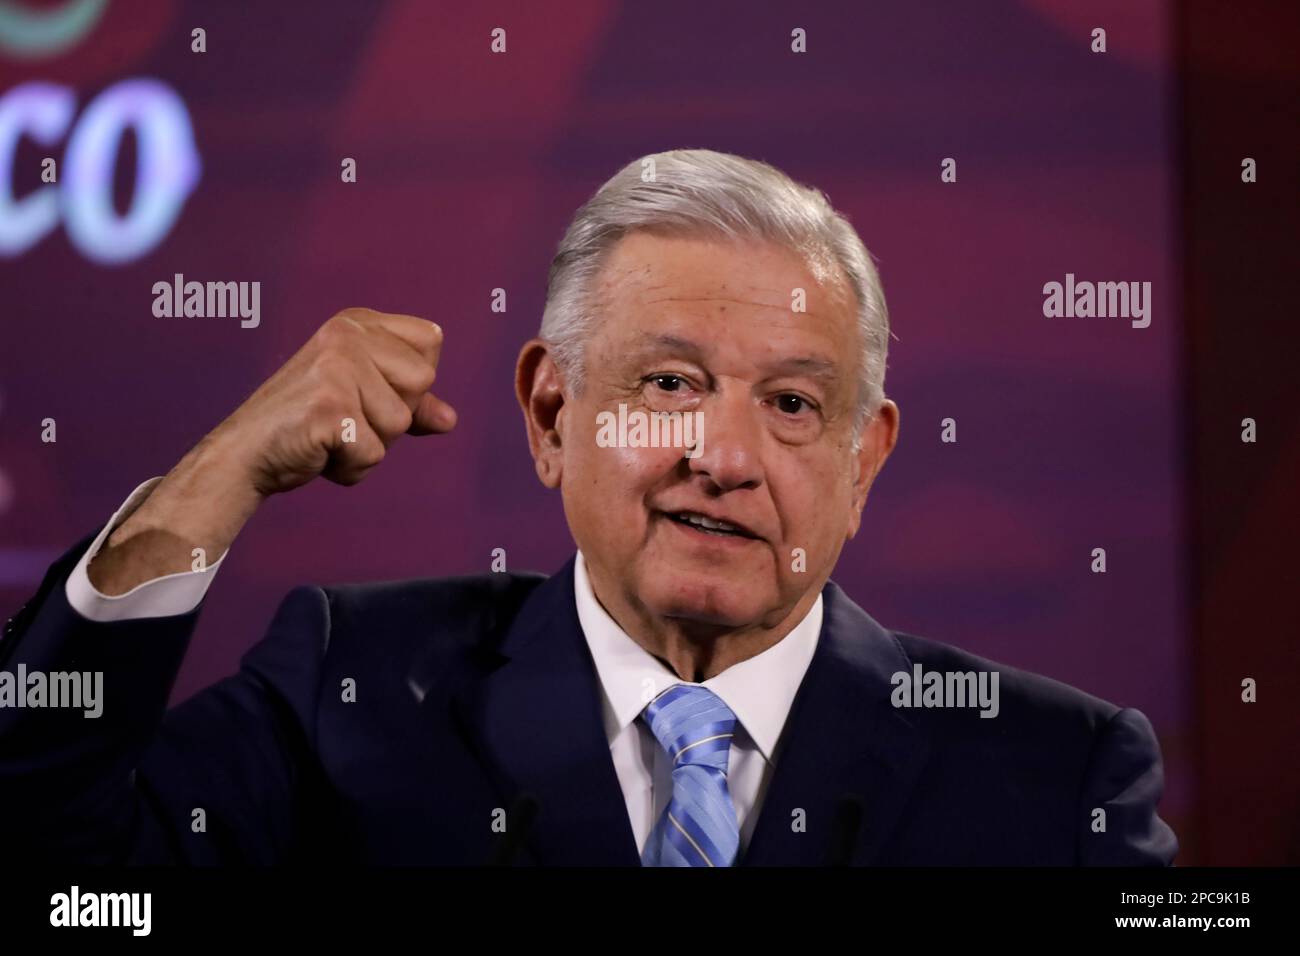 March 13, 2023, Mexico City, Mexico: The President of Mexico, Andres Manuel Lopez Obrador during the press conference before reporters at the National Palace in Mexico City. on March 13, 2023 in Mexico City, Mexico (Photo by Luis Barron / Eyepix Group). Stock Photo